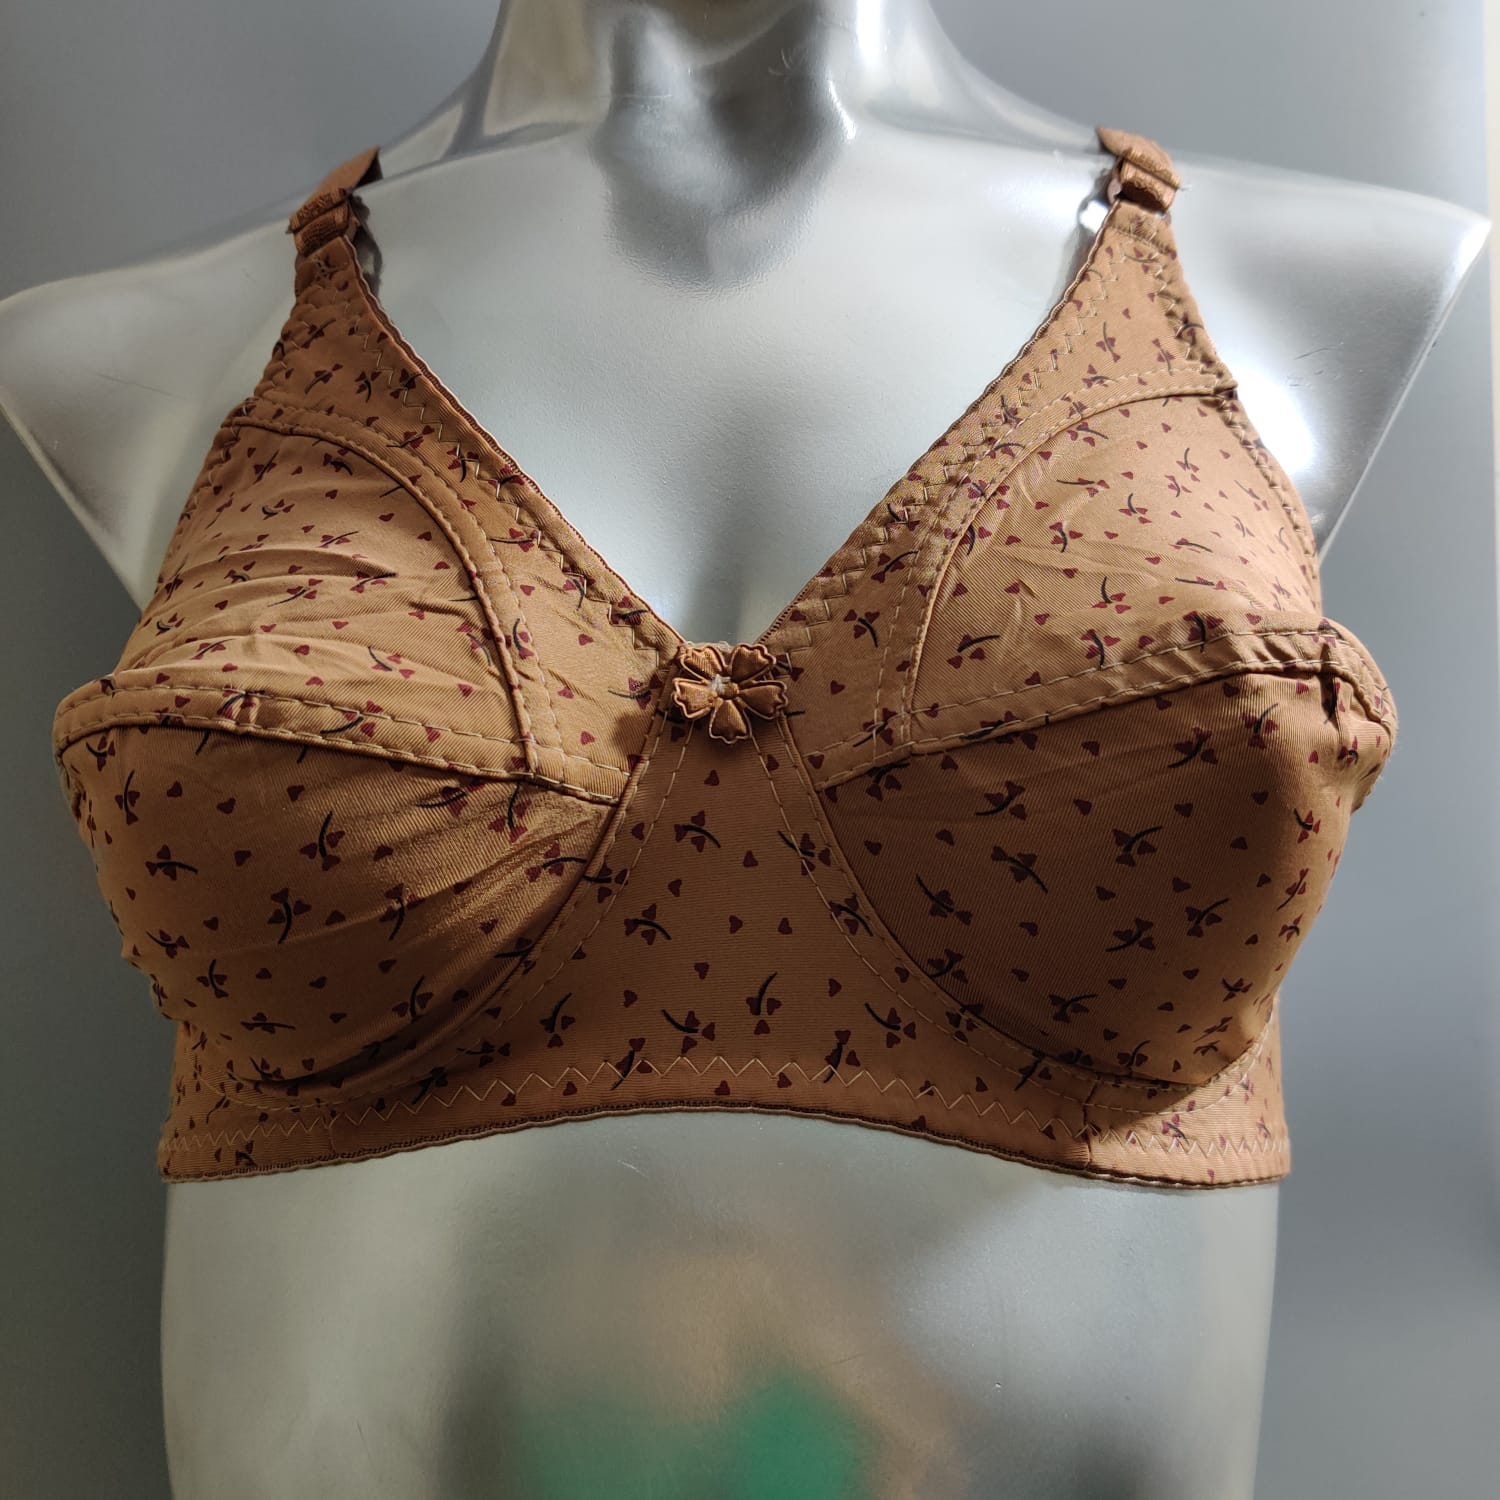 Non Padded Non Wired Bra, Shop 12 items